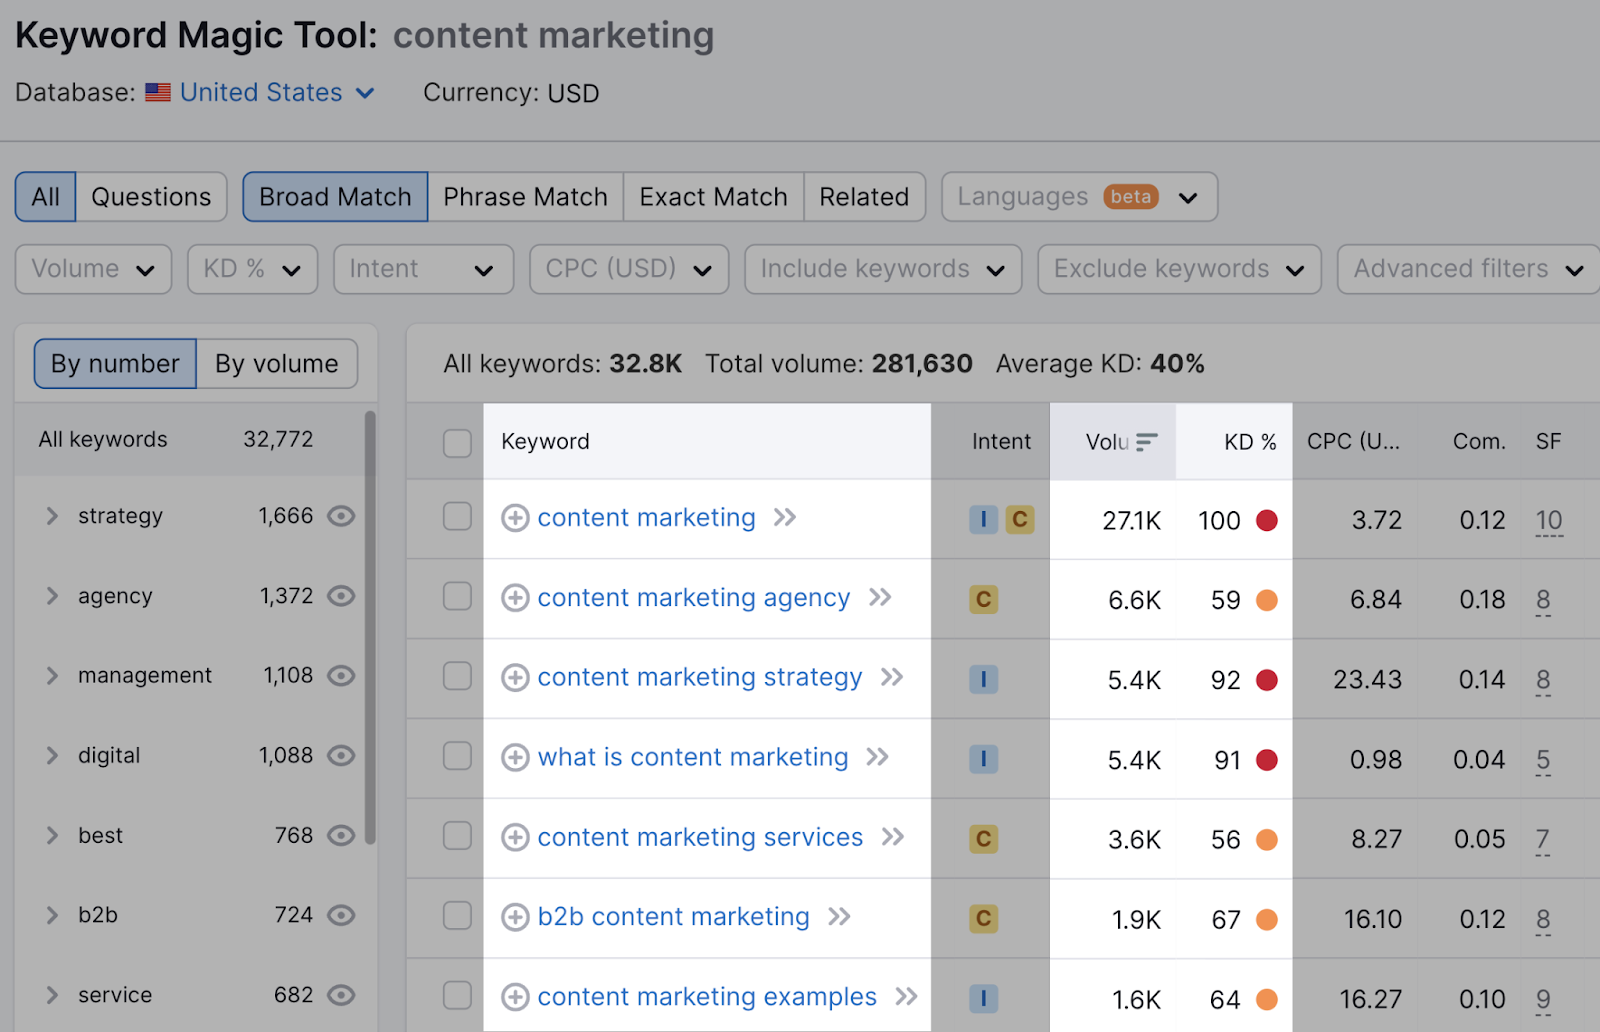 different variations shown for the searched keyword "content marketing"